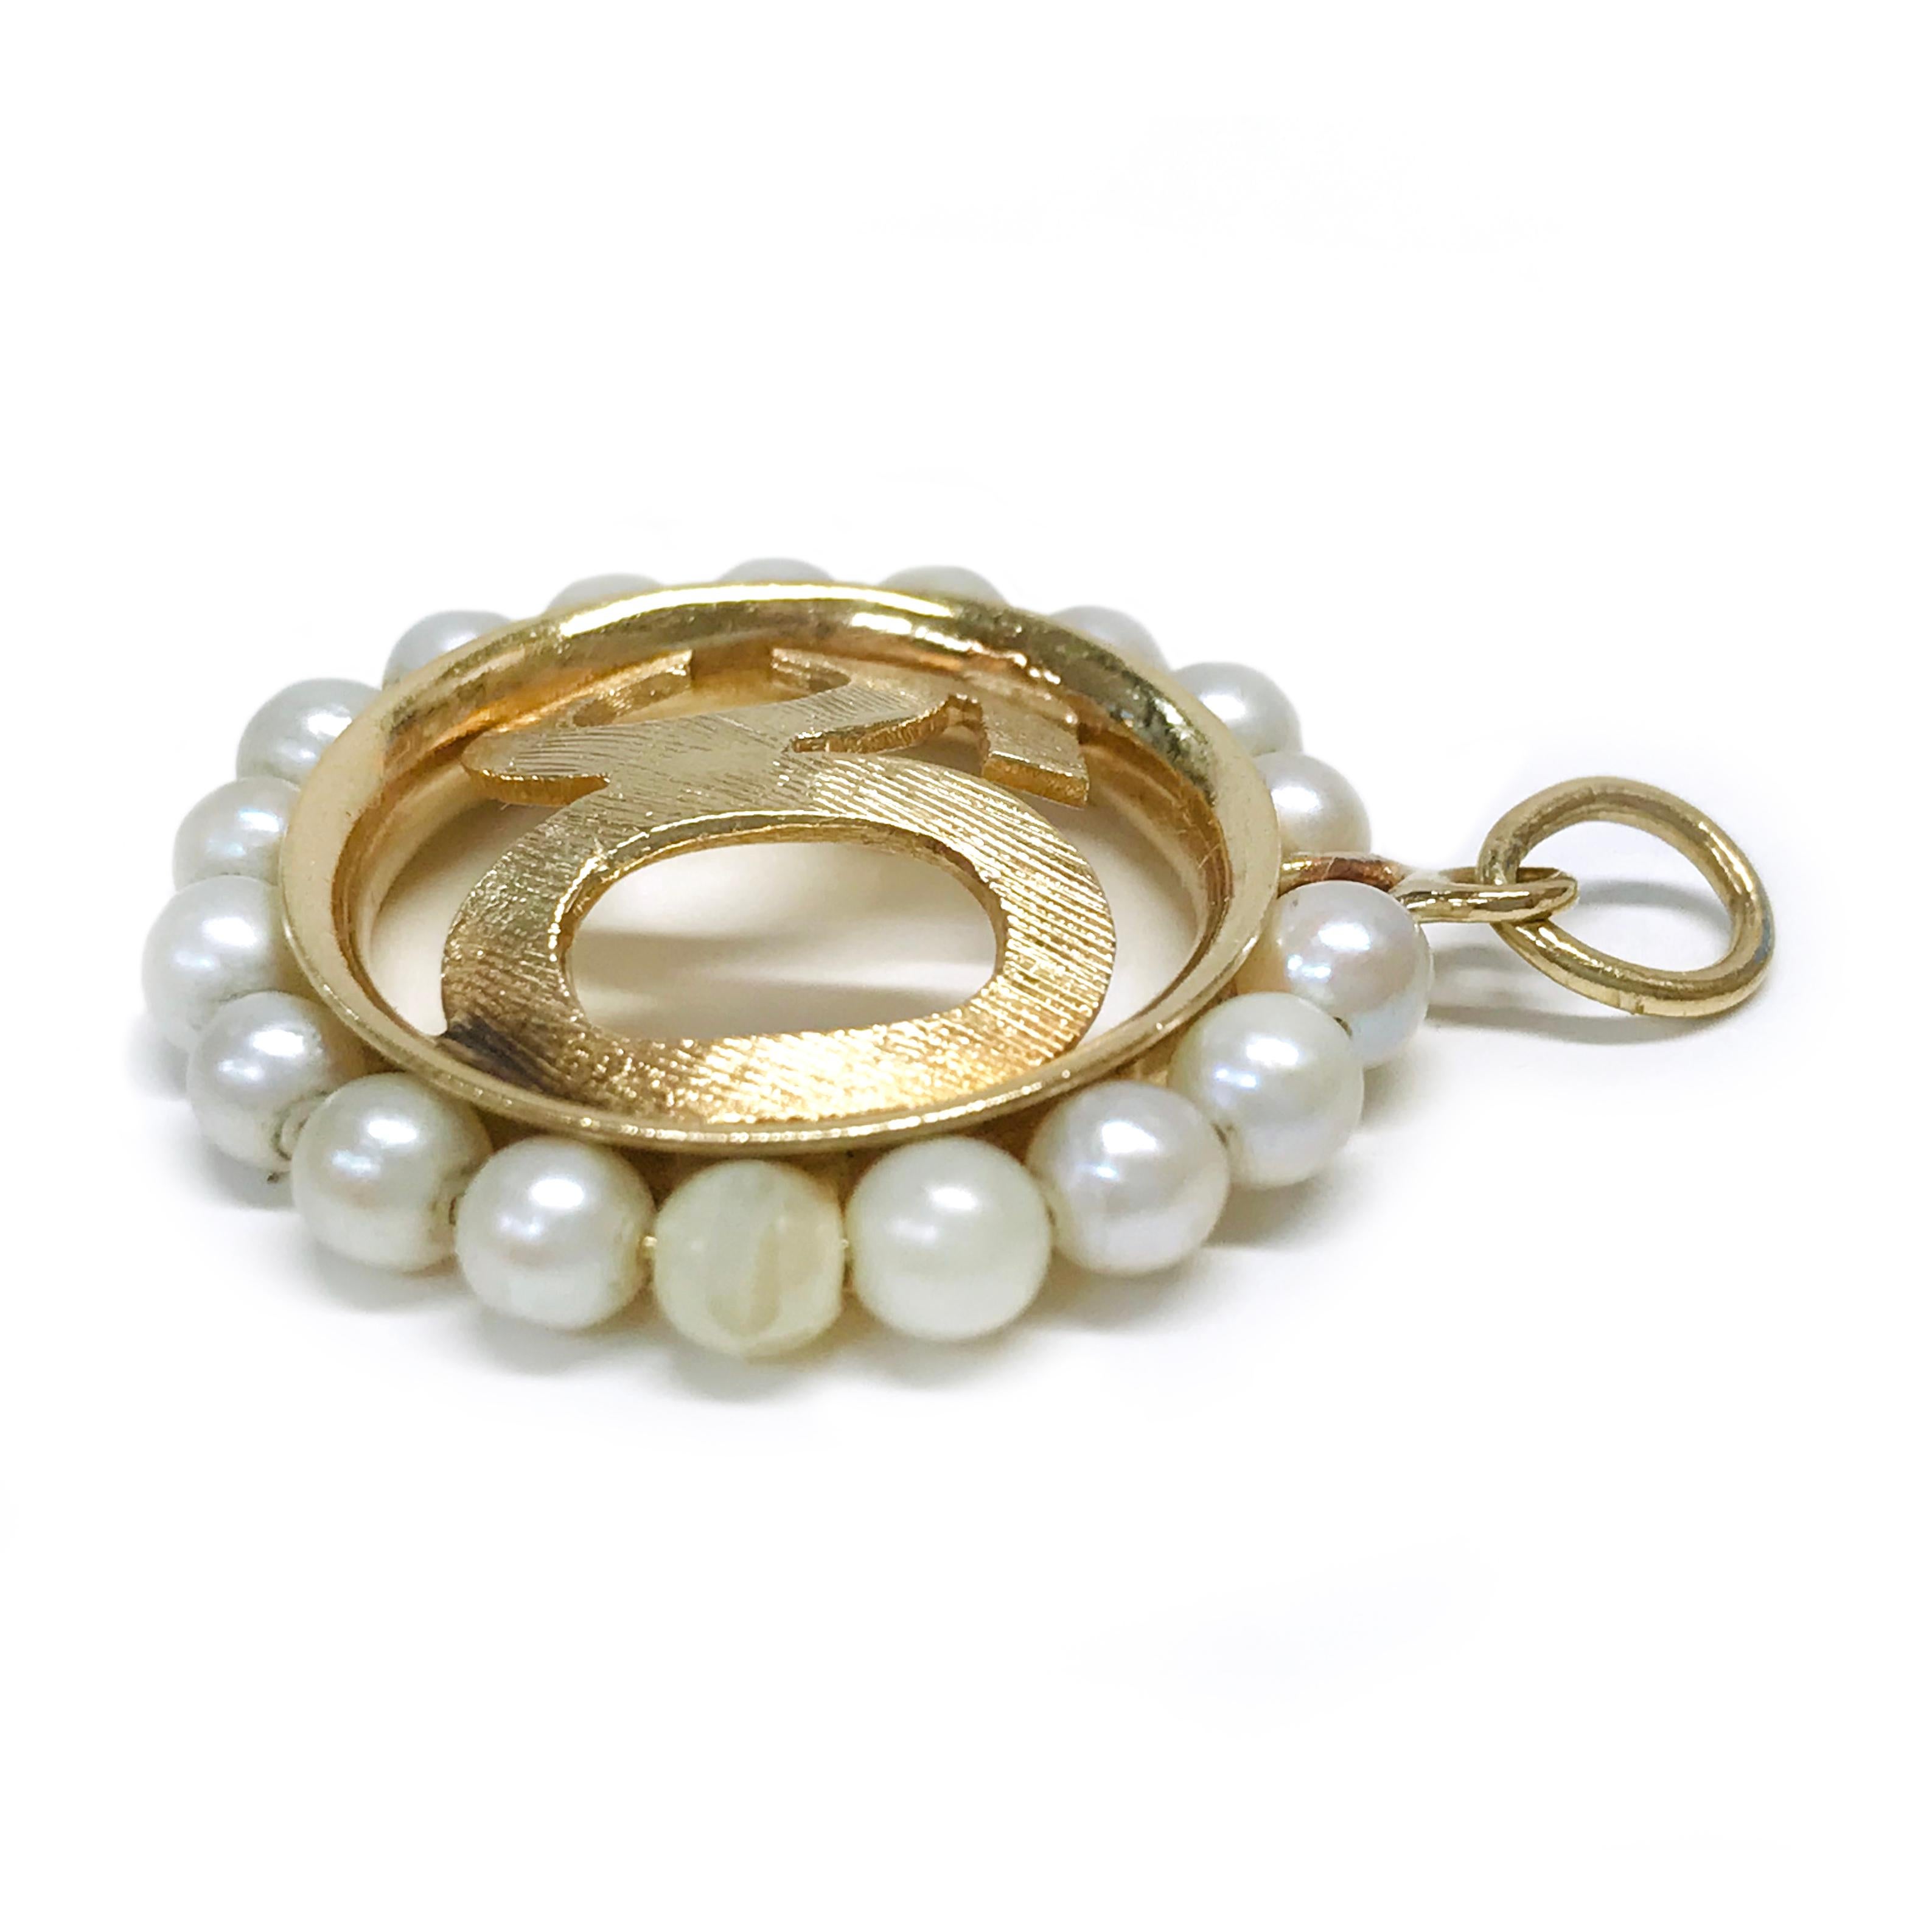 14k Yellow Gold Rembrandt Ring of Pearls Pendant. In the center of the pendant is 50 in gold with an angle satin pattern and eighteen pearls surrounding the center. The pearls are approximately 3.5mm, set on a wire in a circle shape for a simple yet